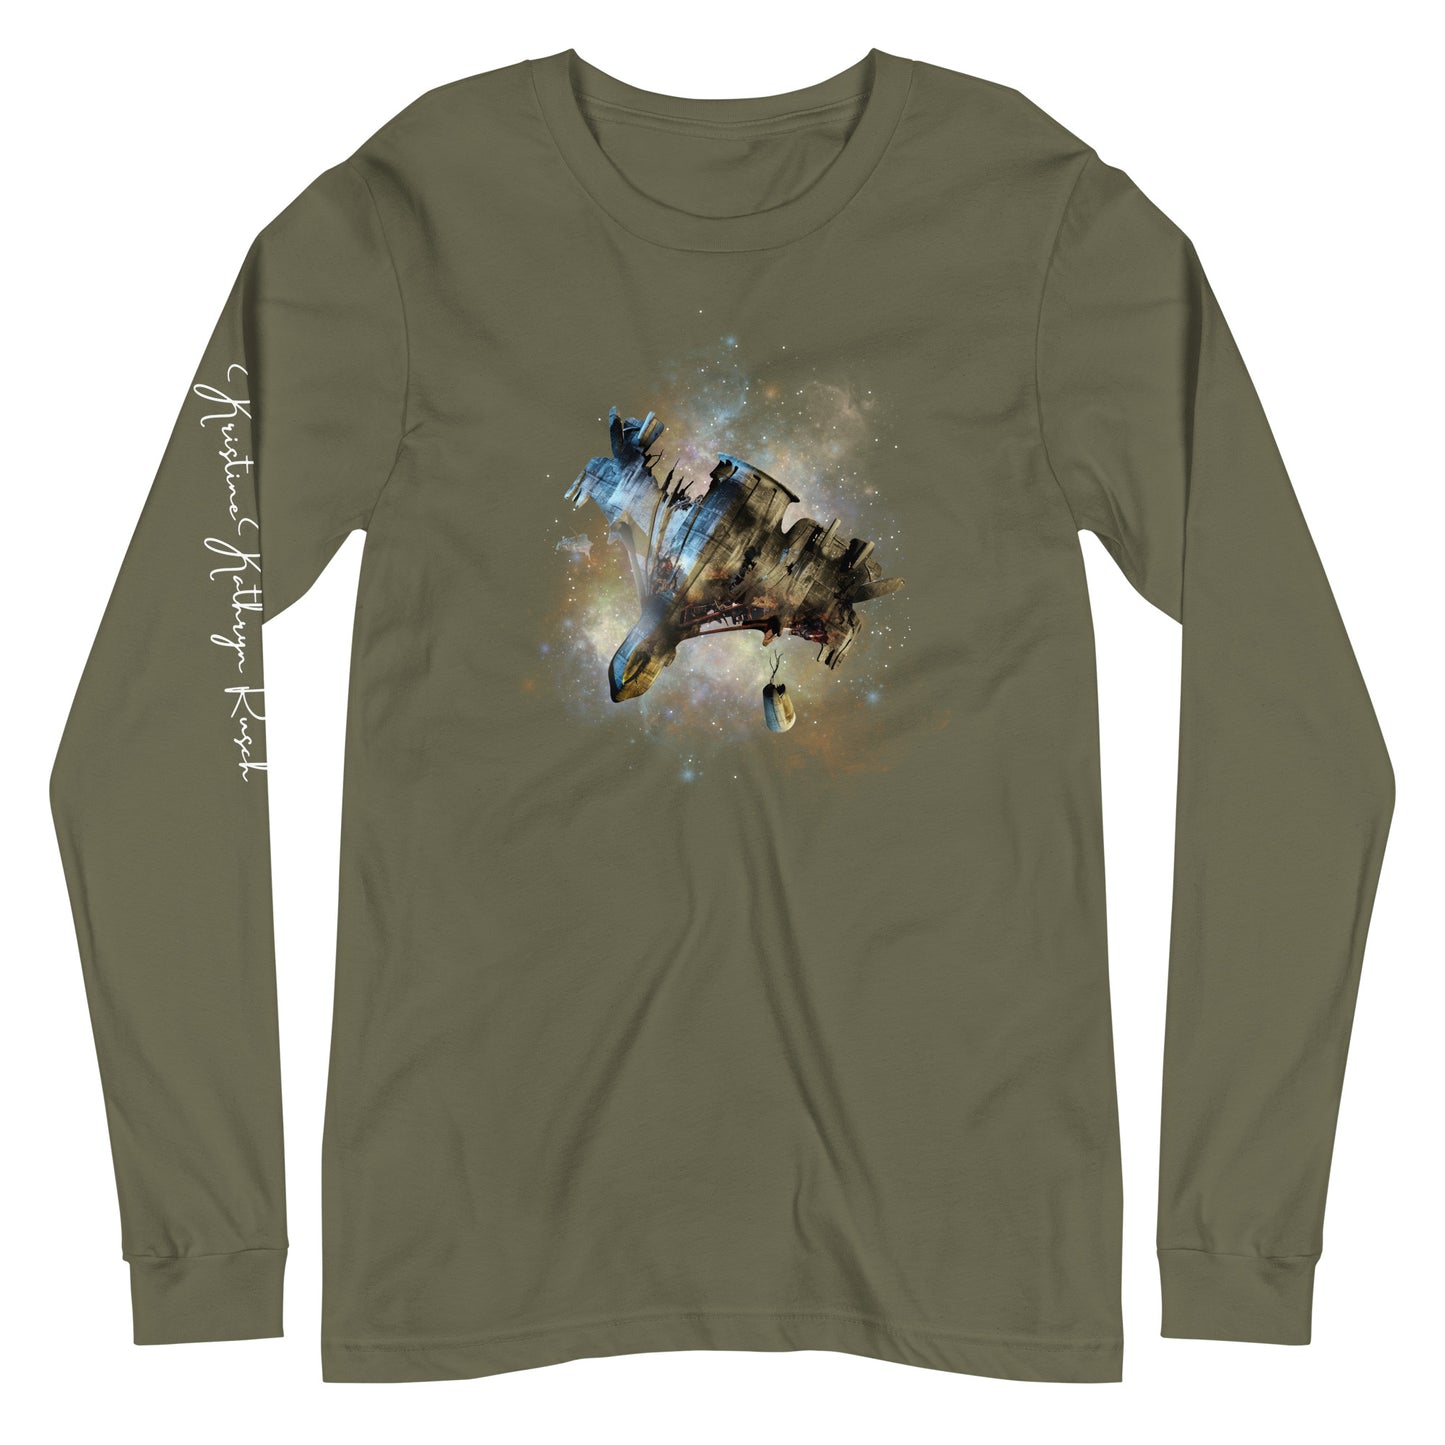 SPACESHIP WRECK L/S Tee - The Diving Universe by Kristine Kathryn Rusch